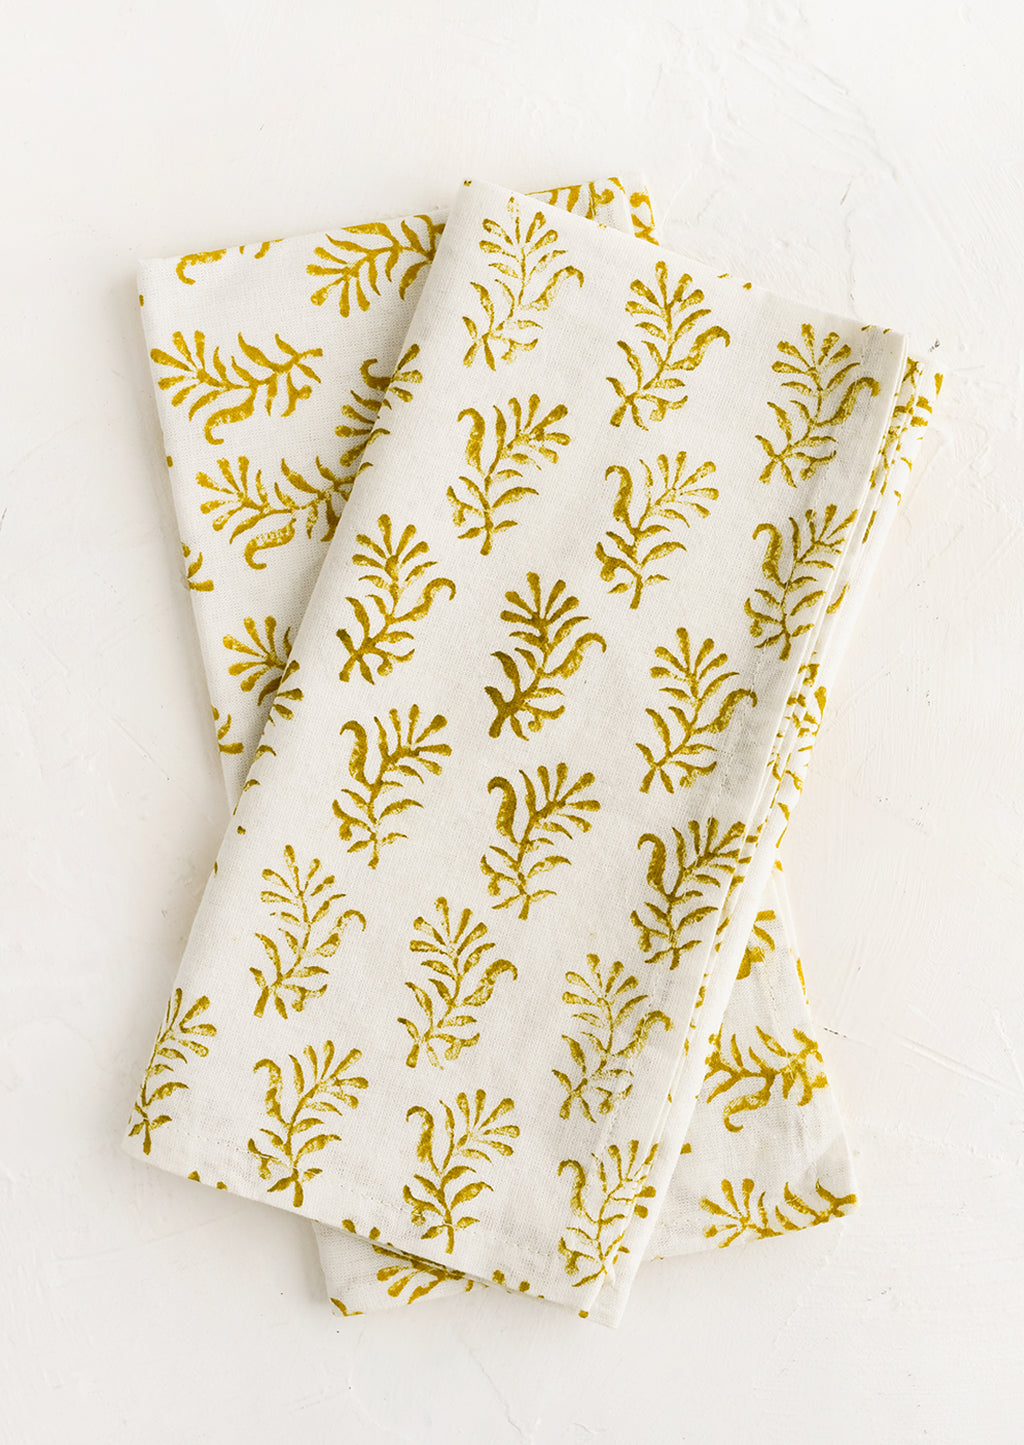 1: A pair of block printed napkins in white with yellow floral print.